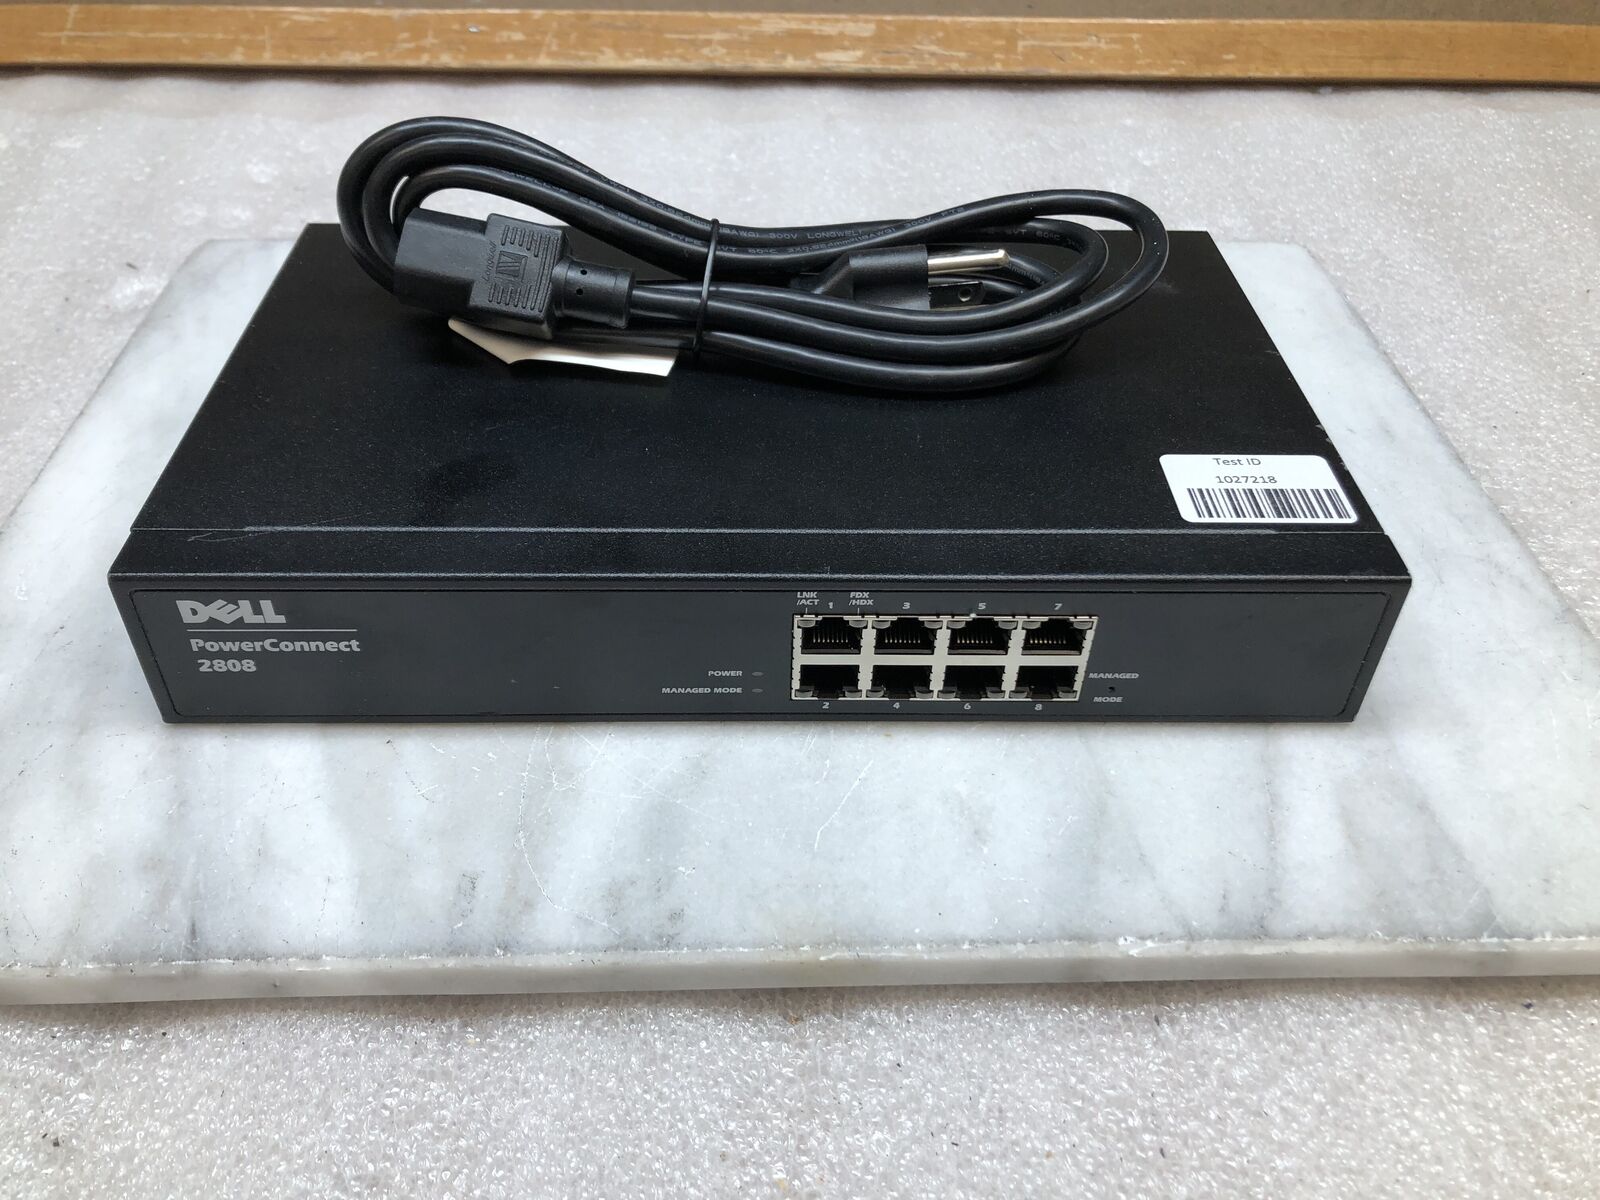 Dell PowerConnect 2808 8-Port Ethernet 10/100/1000 Gigabit Network Switch TESTED